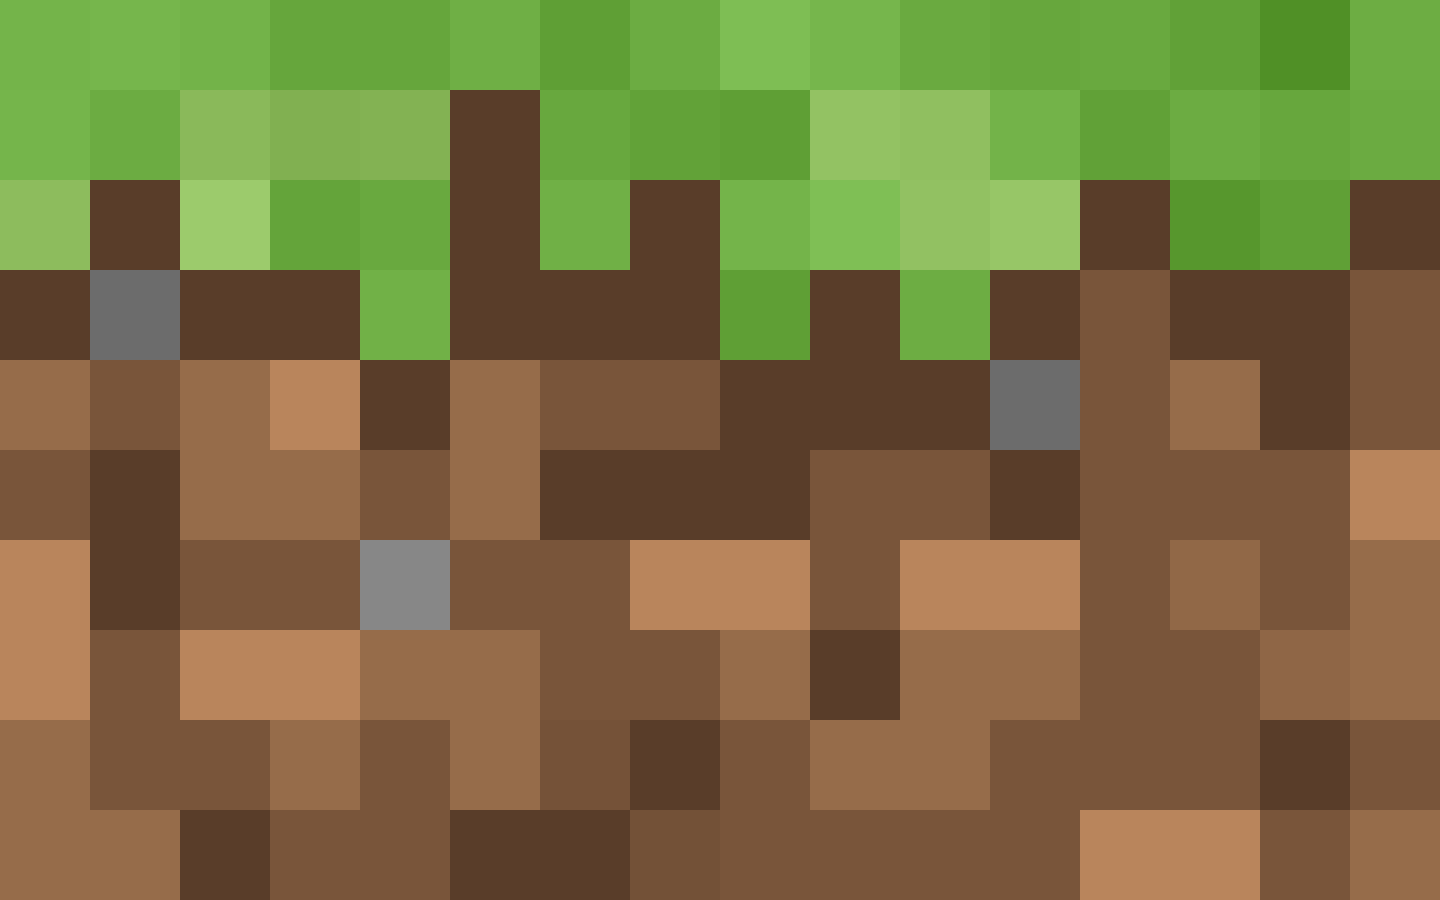 Wallpaper Games Another Minecraft This Time Of A Dirt Block